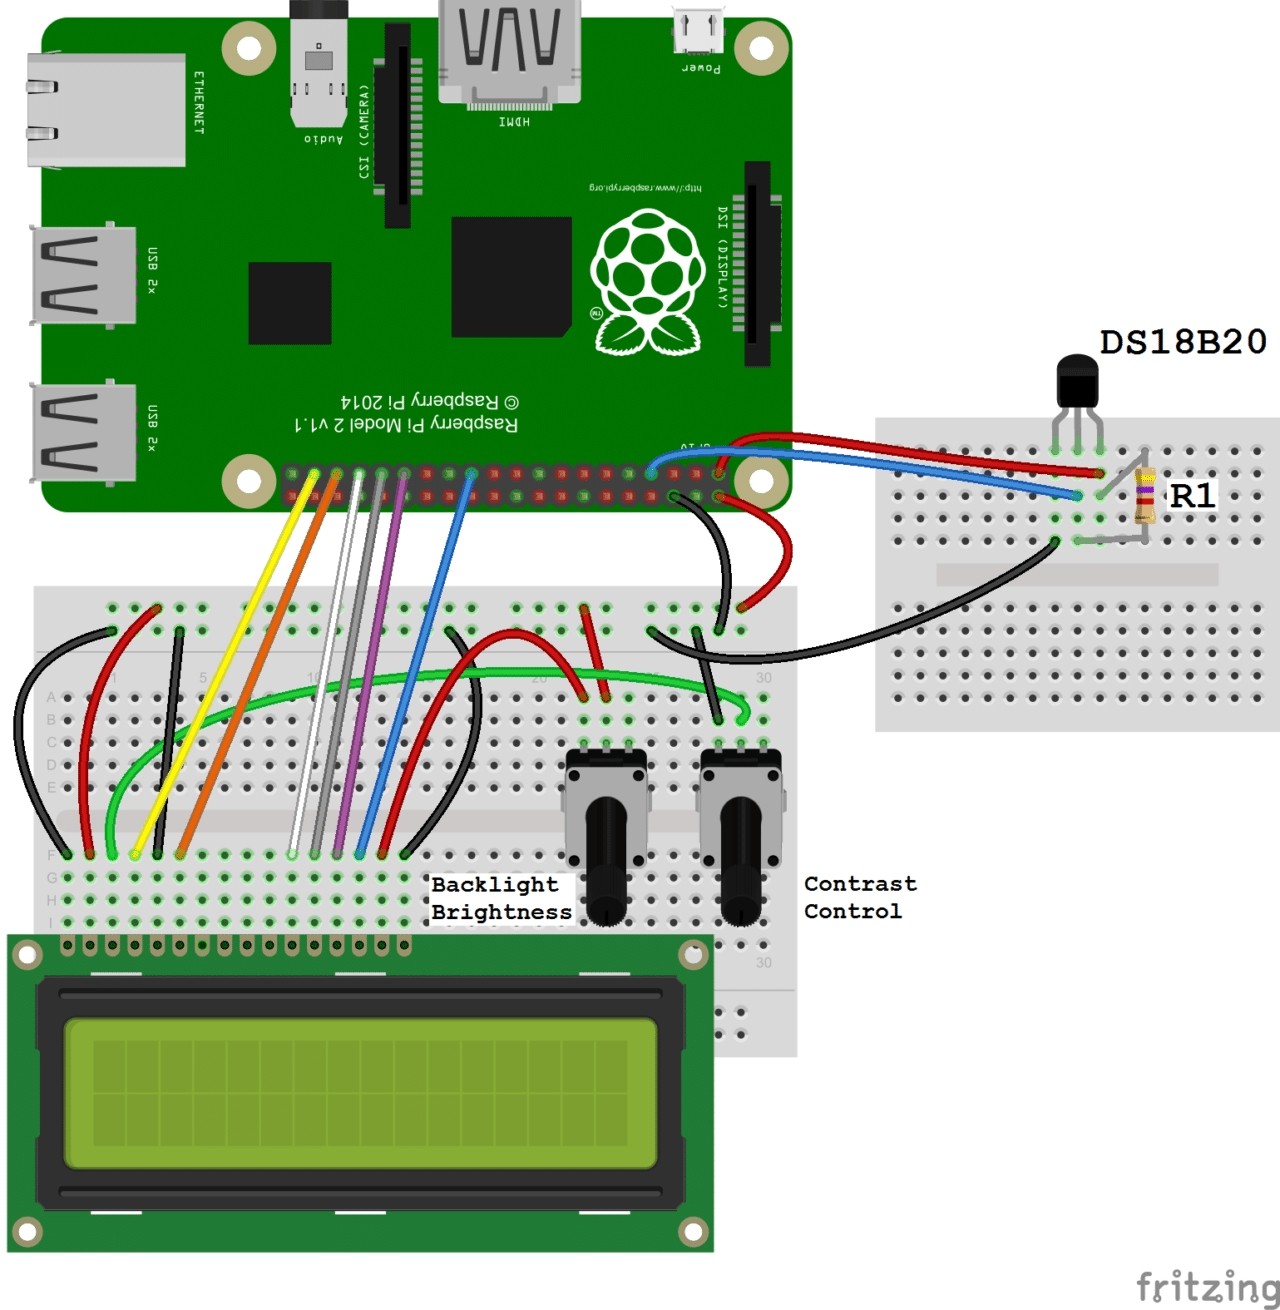 raspberry pi circuit diagram Follow this diagram to output the temperature readings to an LCD DOWNLOAD Wiring Diagram Details